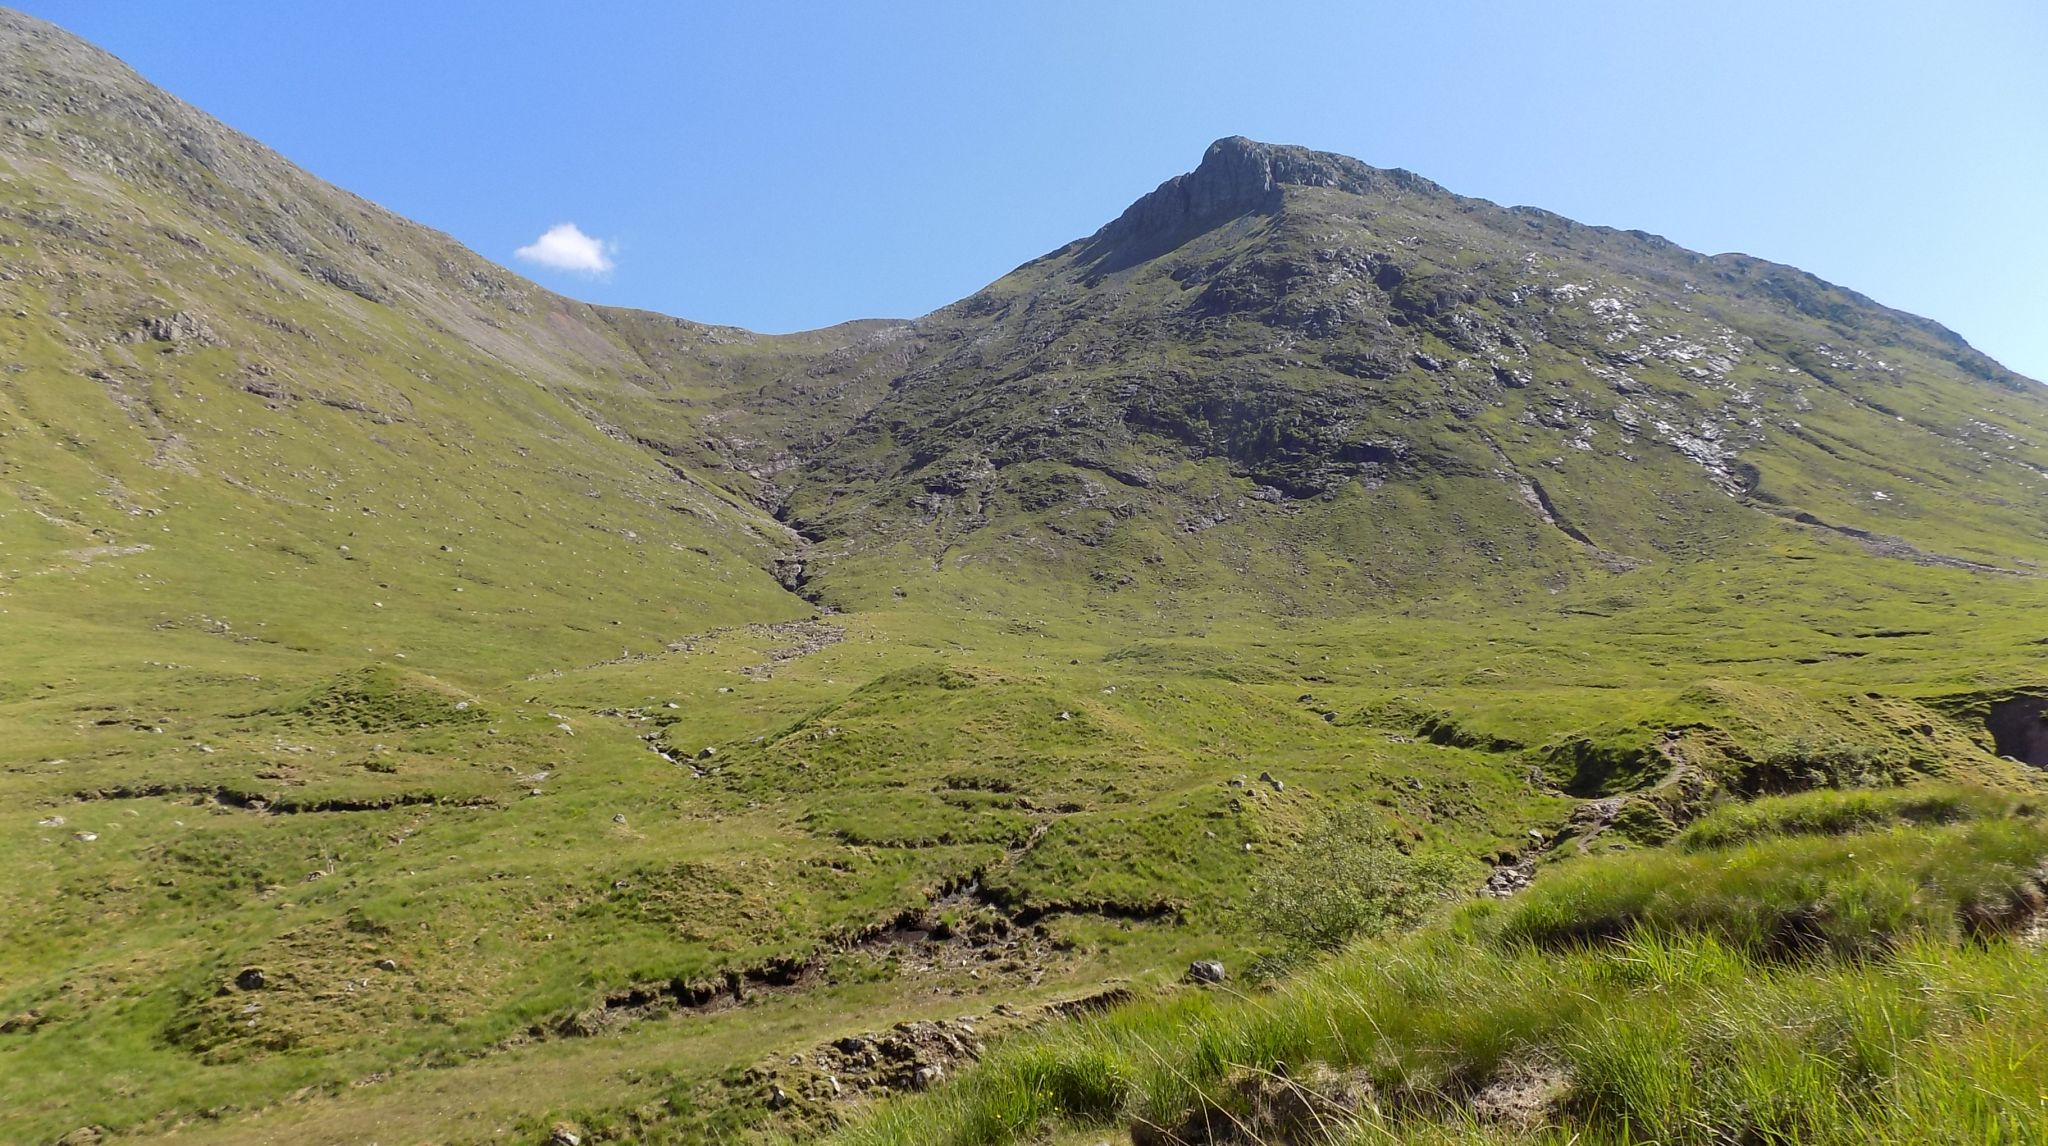 Descent route from Stob na Broige to the Lairig Gartain